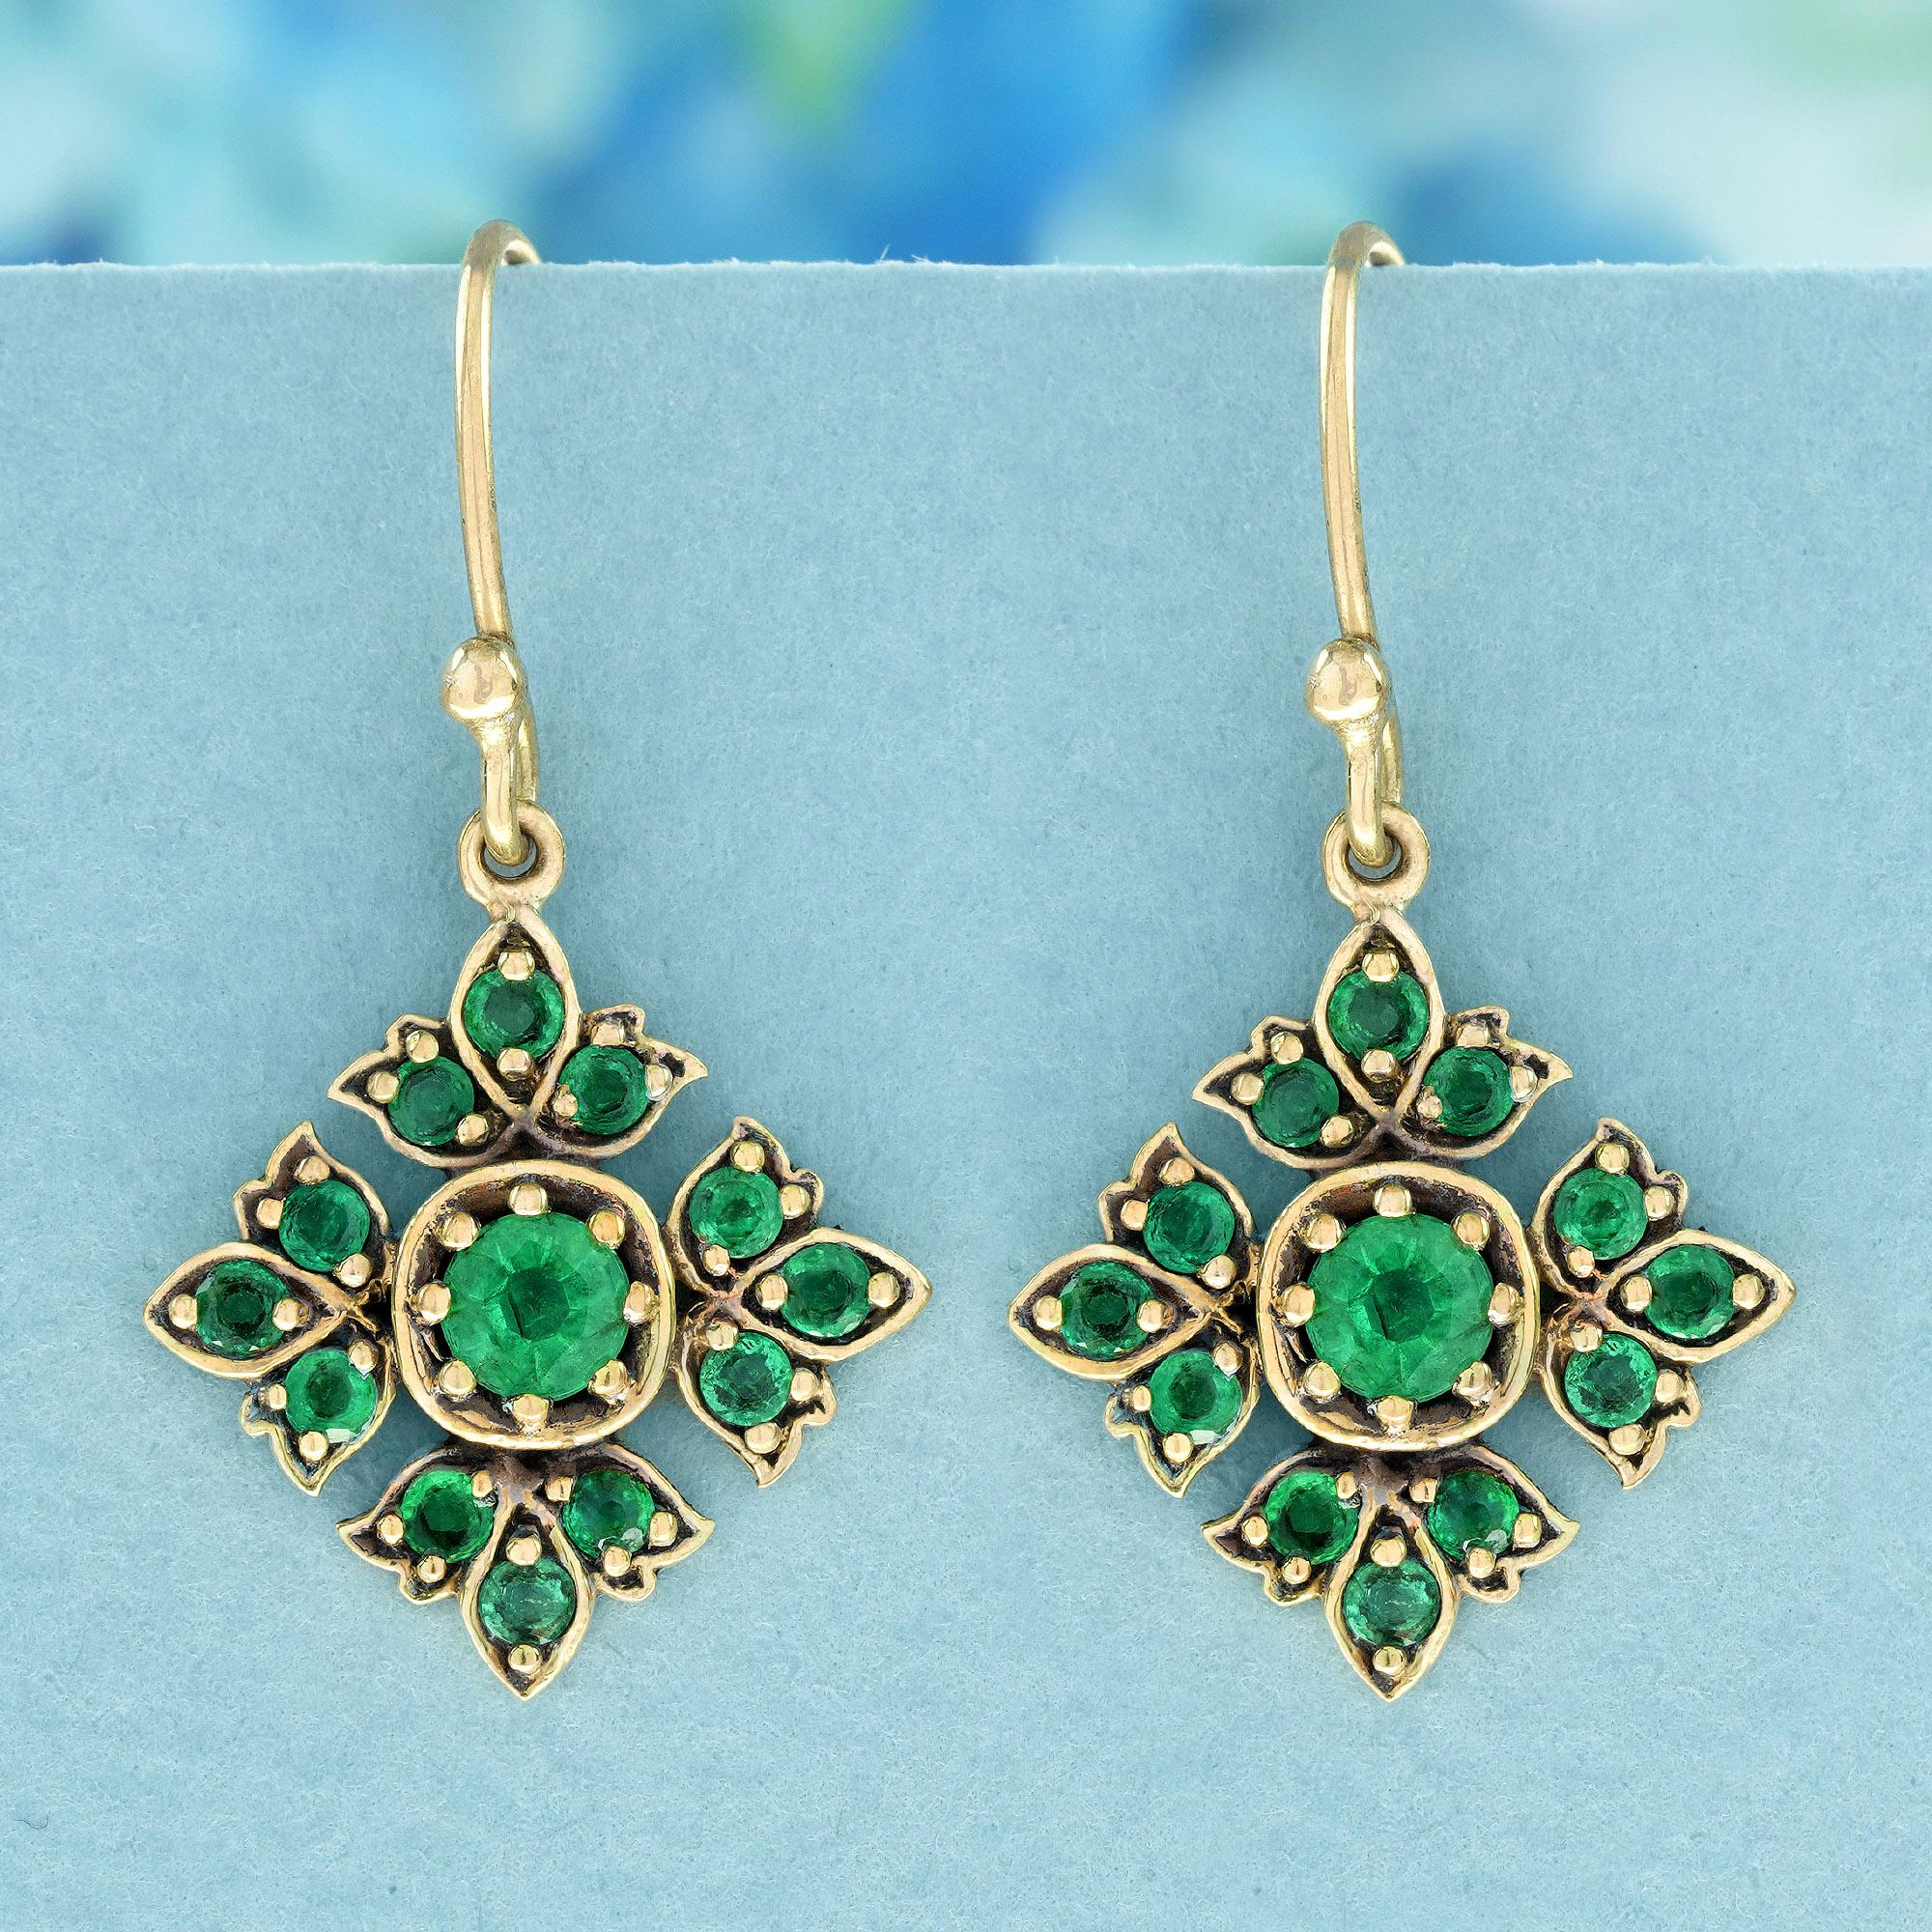 These Vintage Style Floral Drop earrings showcase a charming floral design adorned with round, verdant emeralds. Each emerald is delicately set in a prong setting, beautifully accentuating the vibrant green hue against the yellow gold frame. This